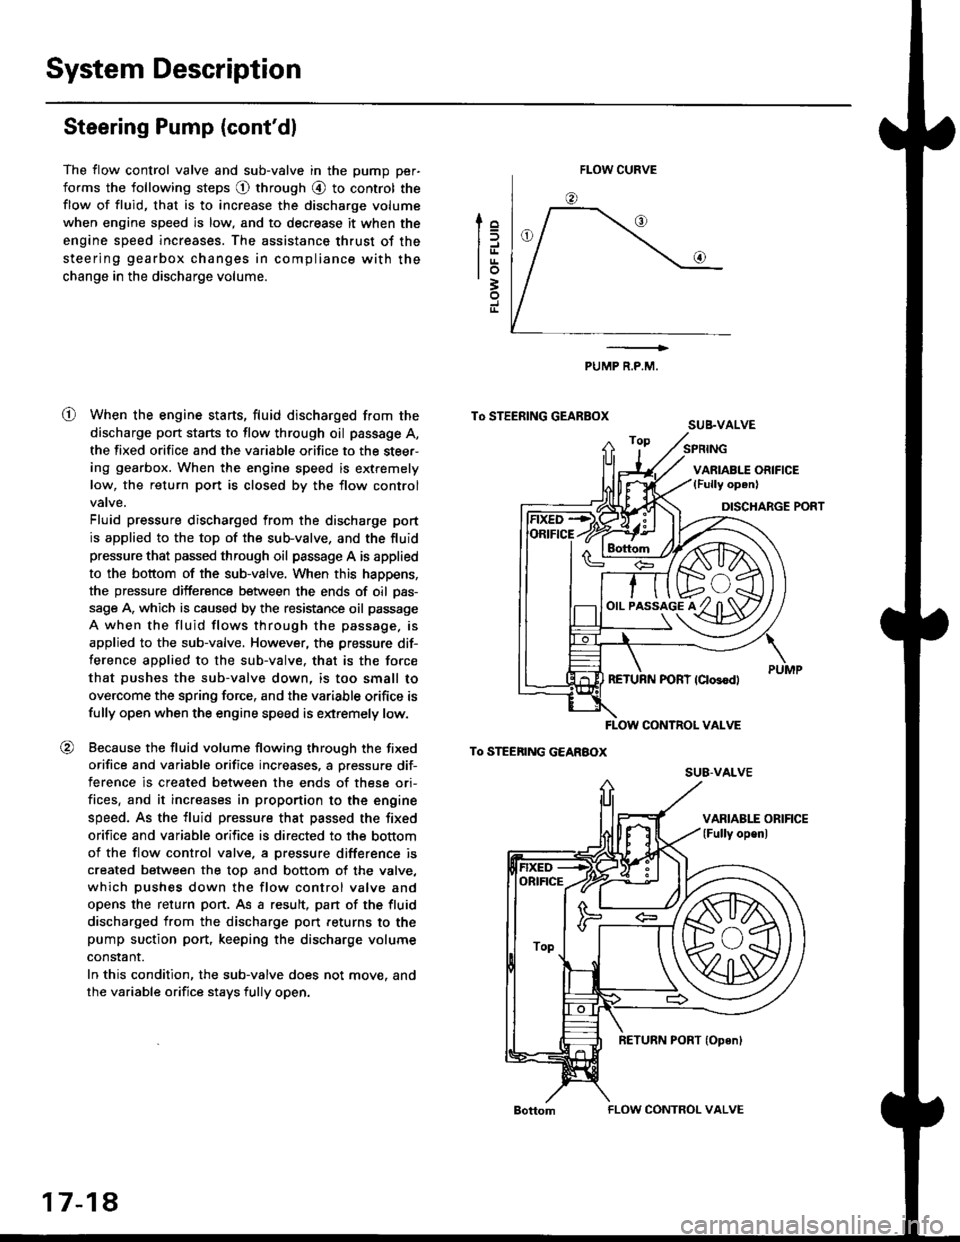 HONDA CIVIC 1998 6.G Owners Manual System Description
Steering Pump (contdl
The flow control valve and sub-valve in the pump per-
forms the following steps @ through @ to control the
flow of fluid, that is to increase the discharge vo